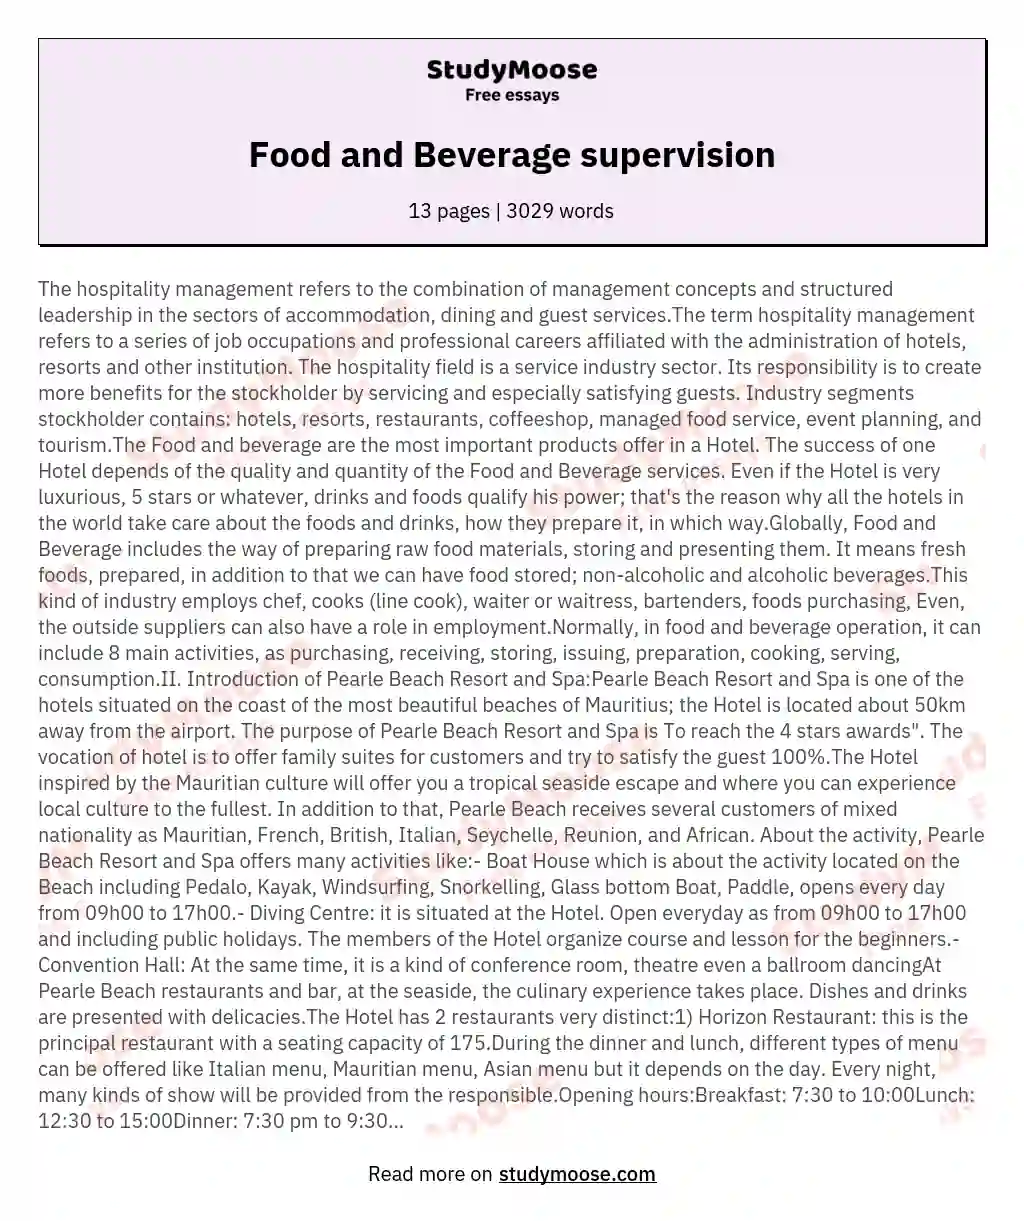 Food and Beverage supervision essay